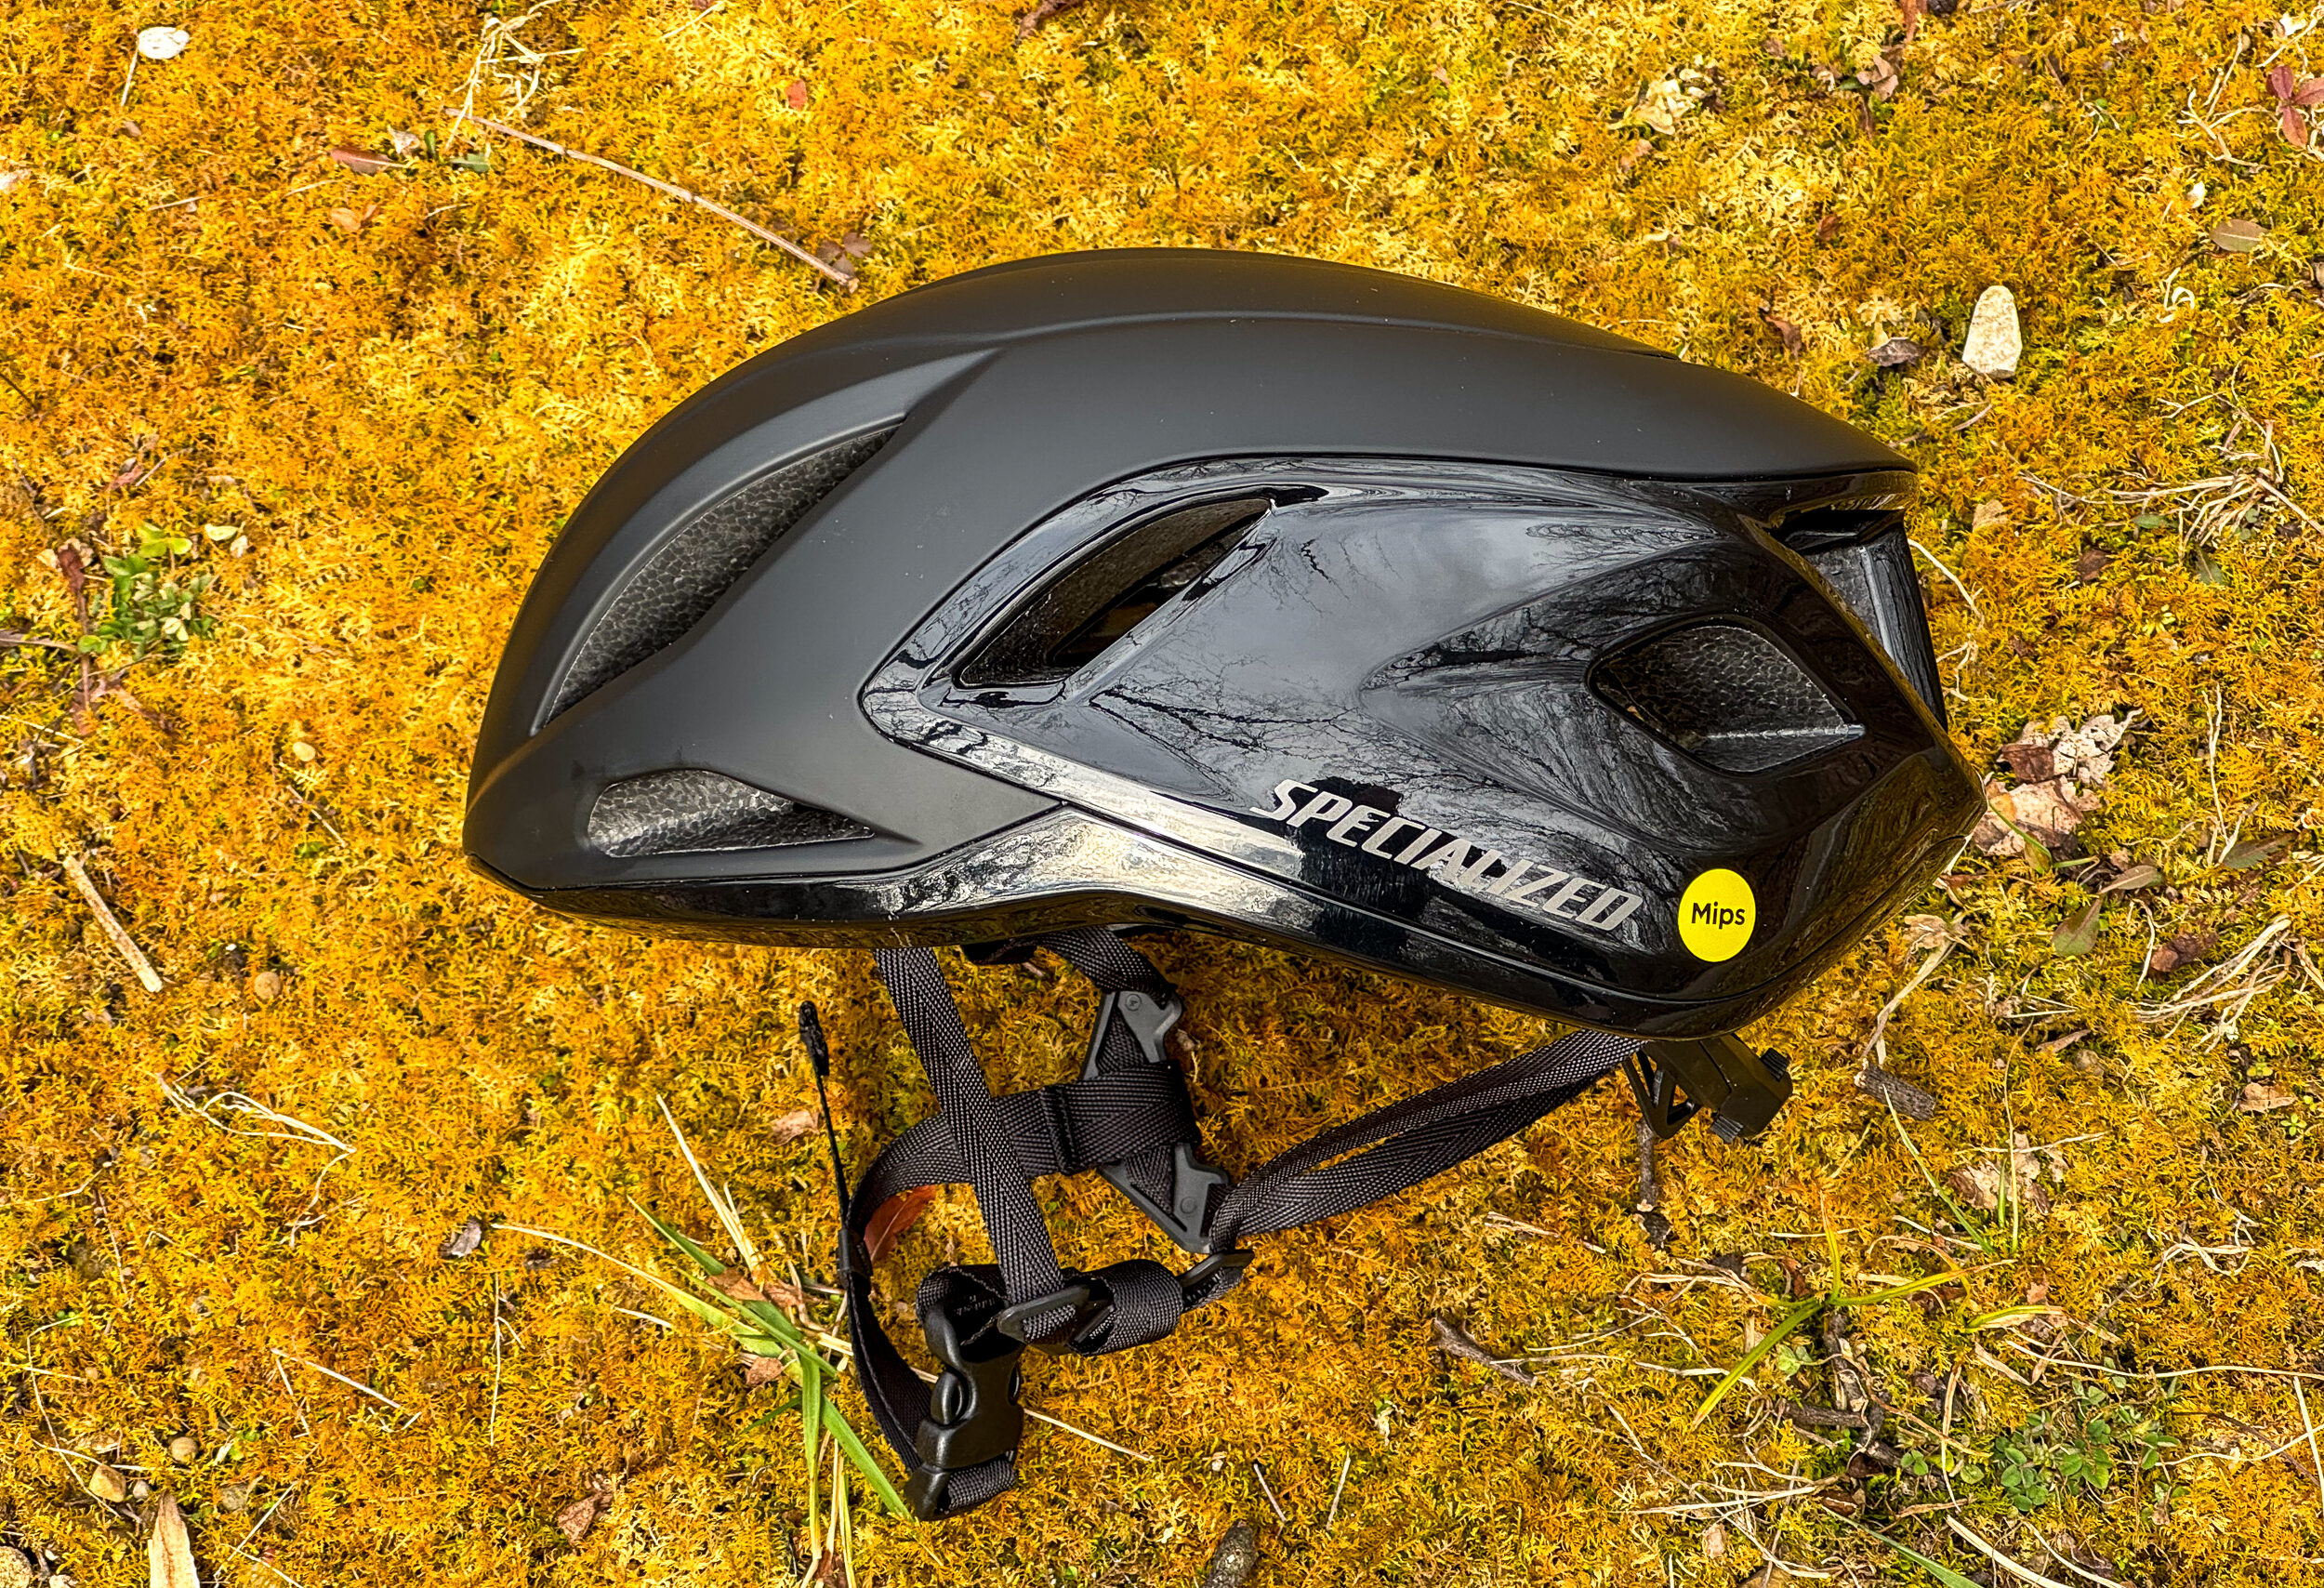 Specialized Propero 4 Helmet is Totally Redesigned for Aero Speed + Ventilation